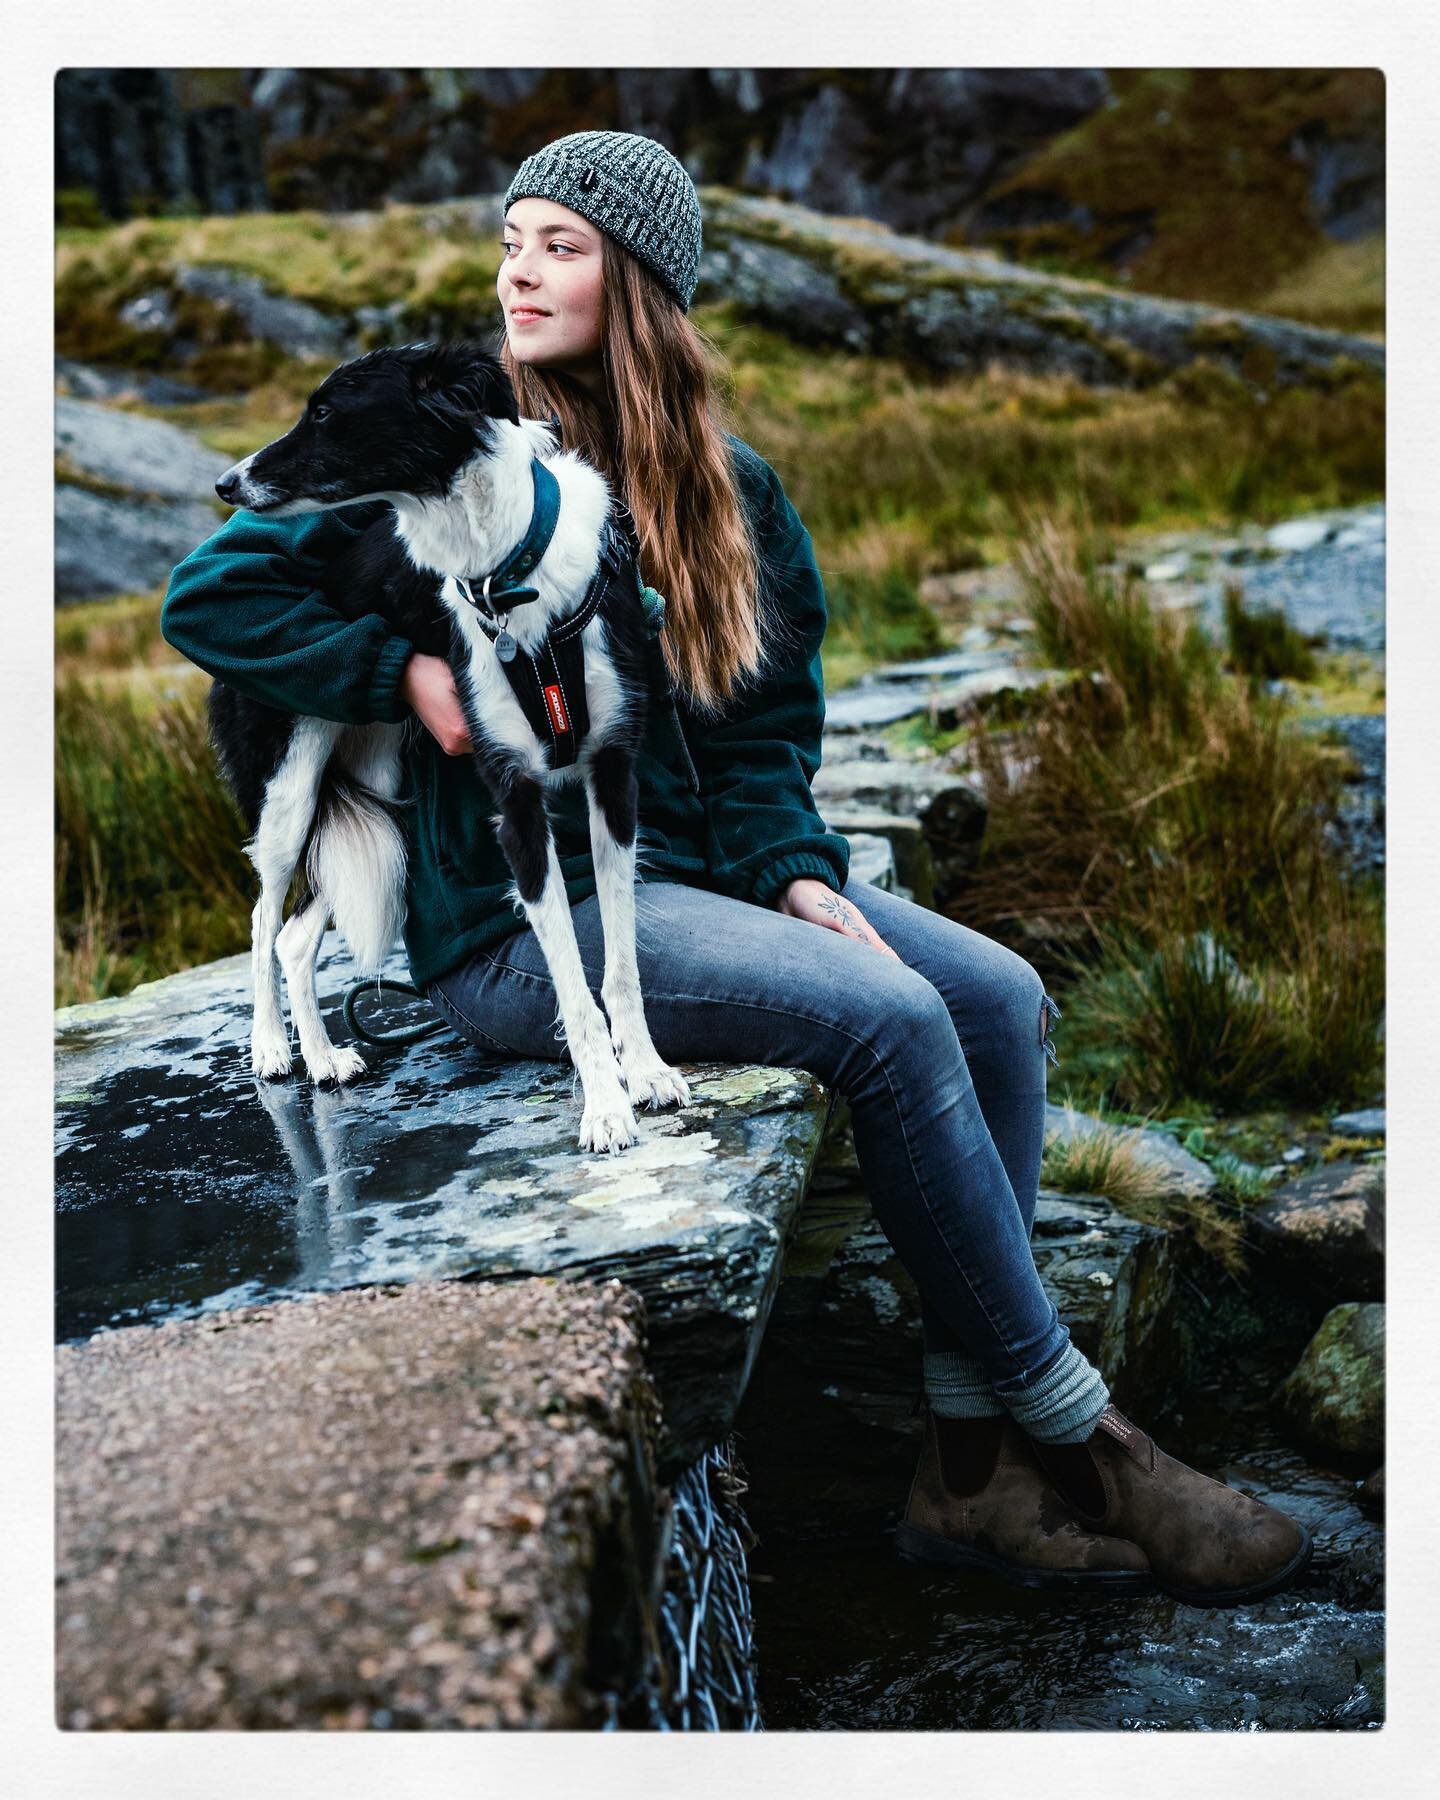 Meet Jasmine and her dog Ivy and read her inspirational story of finding adventure, self belief and a way of overcoming anxiety. Blog now up at @soulkindpeople website. With thanks to @blundstone_uk for their amazing support. Follow Jasmine @jazzysjo